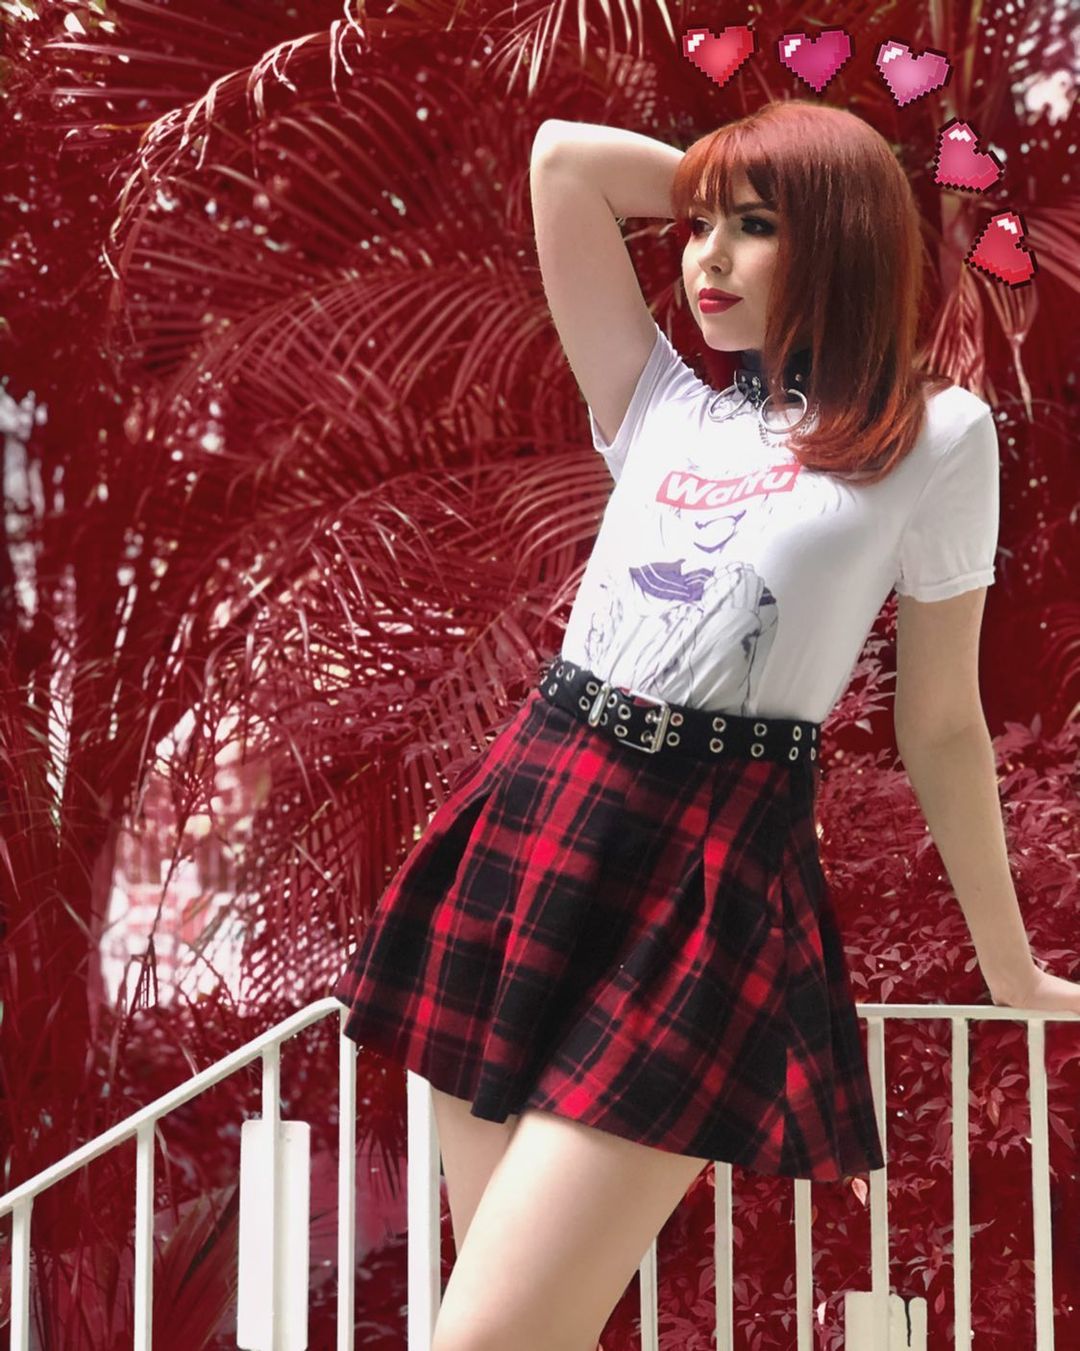 Sassy Girl Saige In Aesthetic White Tee Paired With Red Checkered Skirt